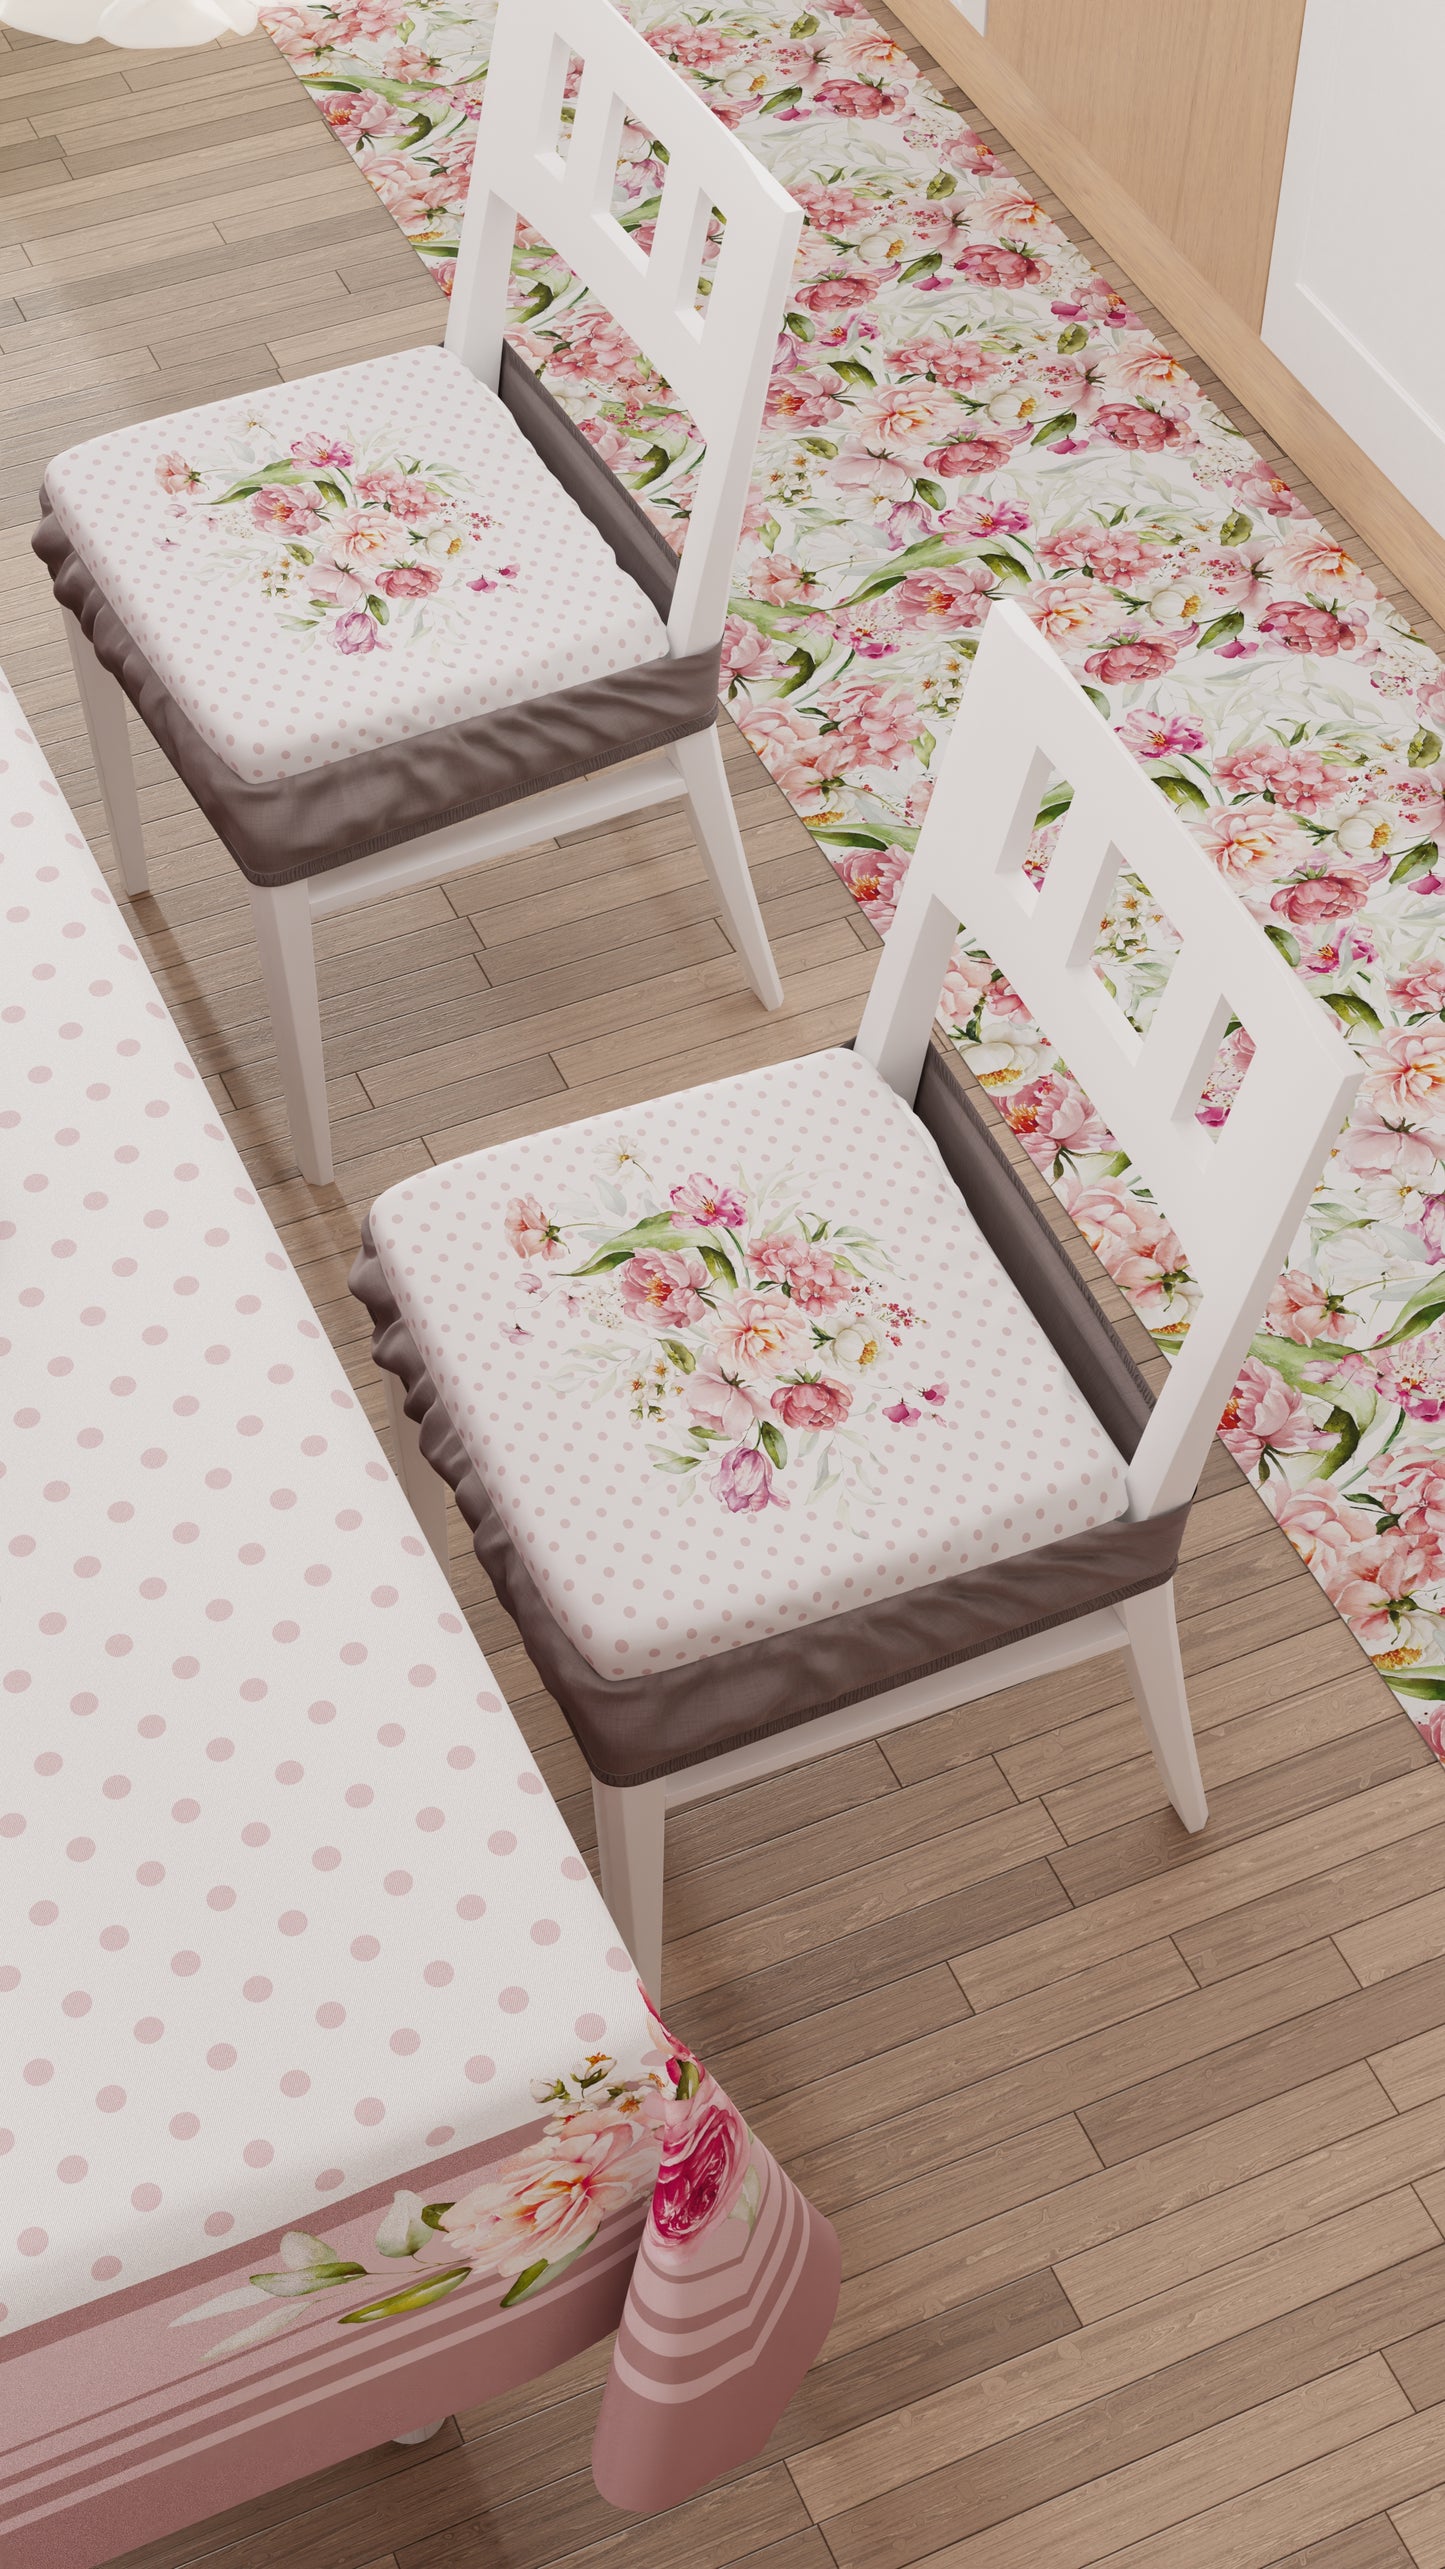 Chair Cushions with Elastic Chair Cover in Digital Print 2 Pieces Shabby Powder